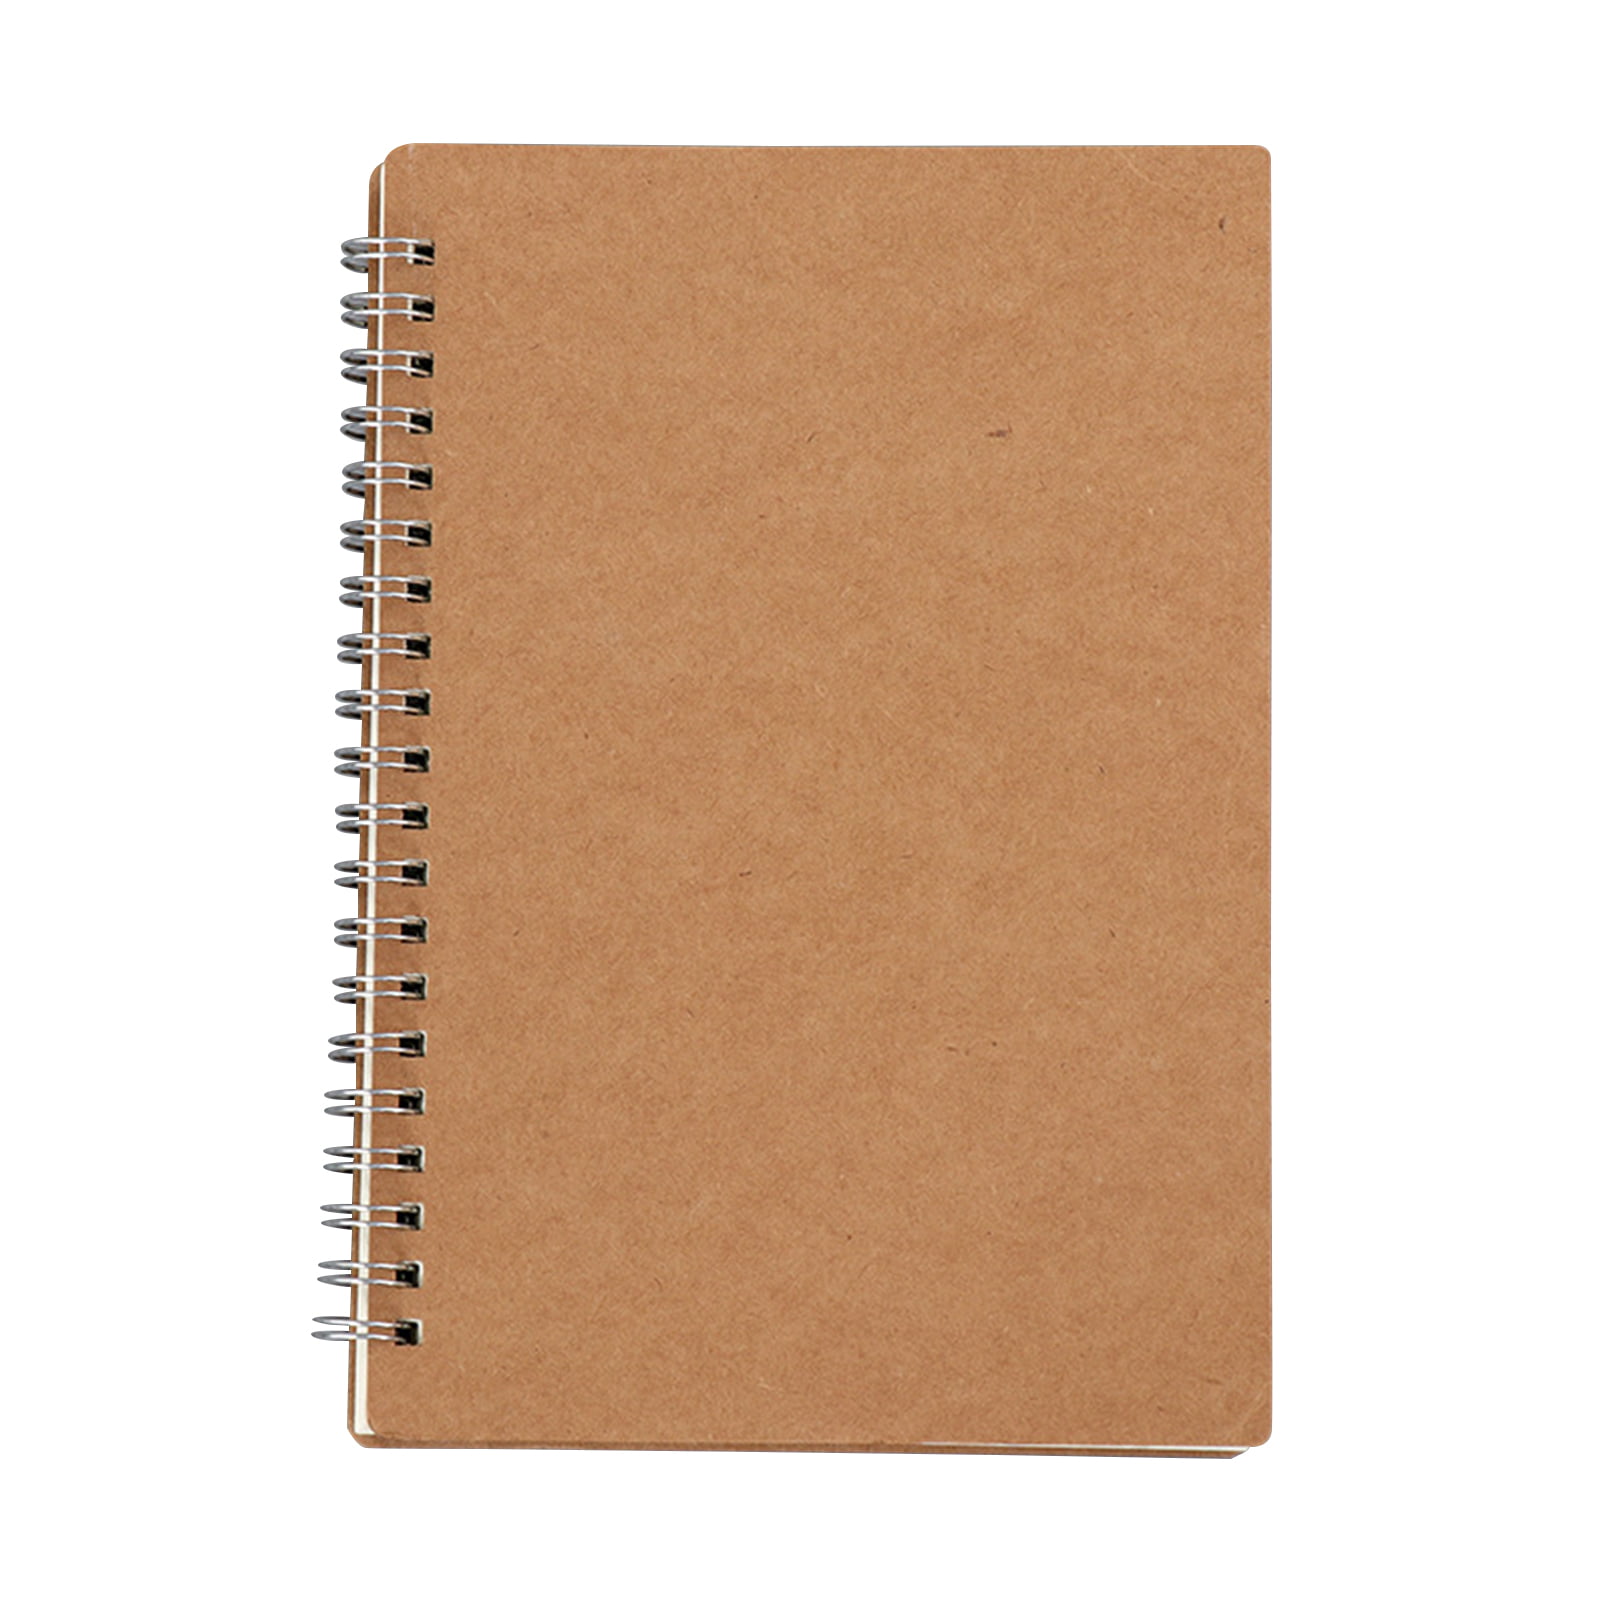 Vegan Leather Hardcover Academic Planner Hourly 2021-2022 Vertical Weekly & Monthly Green POPRUN Agenda August 2021 to Green 2022 with Pocket 6.5 x 8.75 Note & Address Pages 